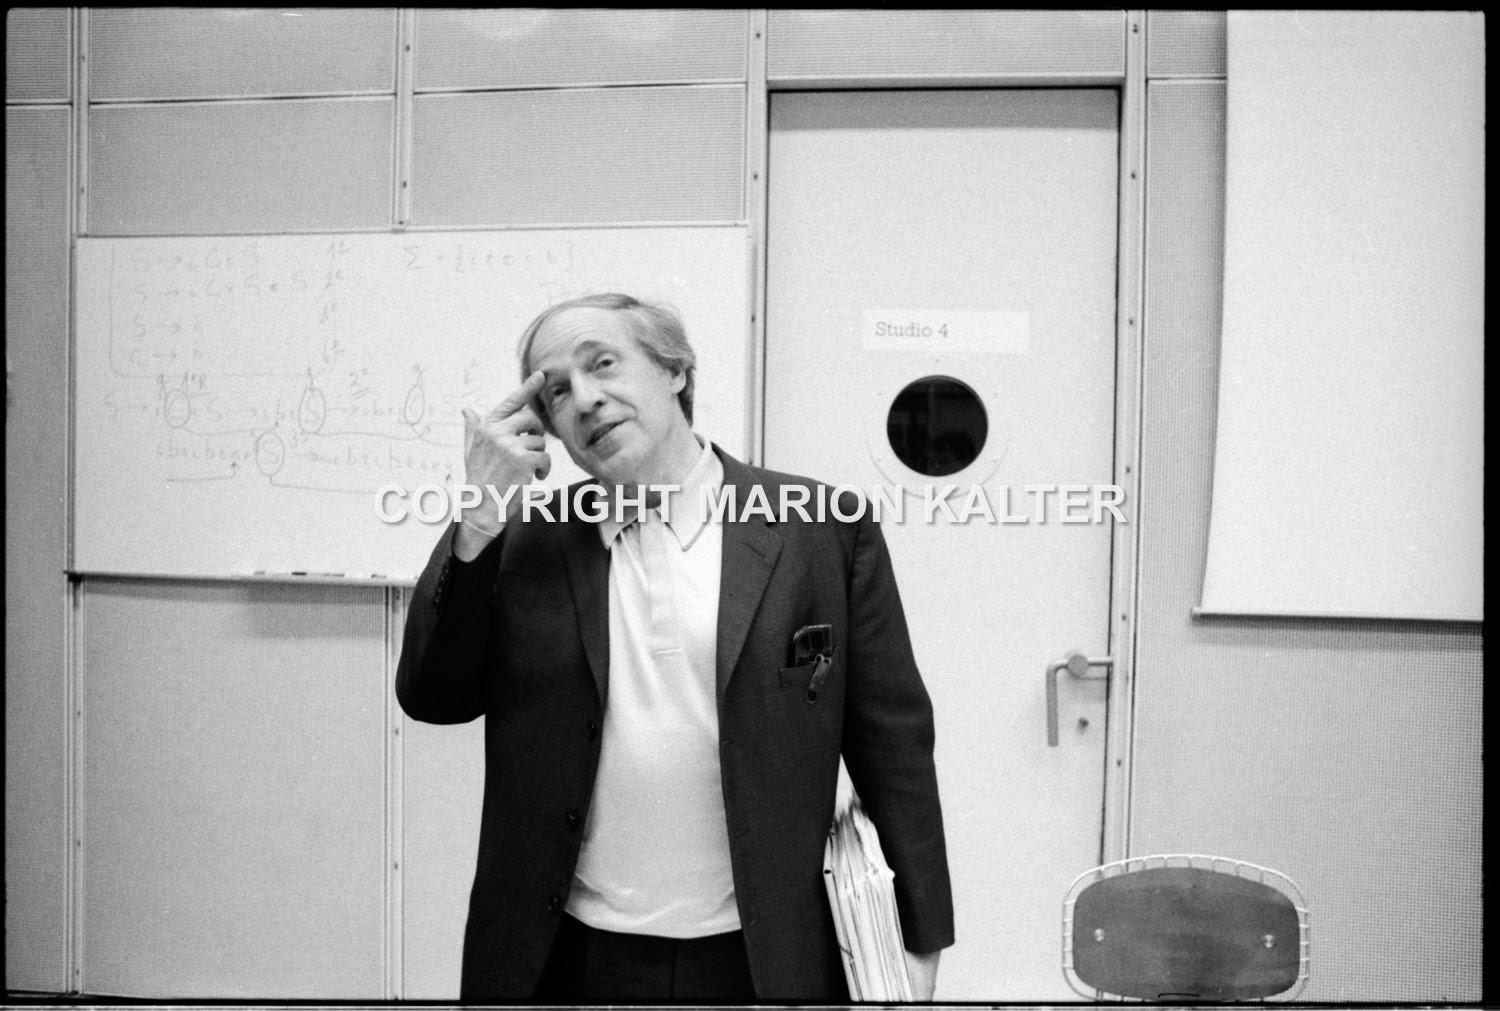 Untold history: Pierre Boulez and the nuclear deterrent